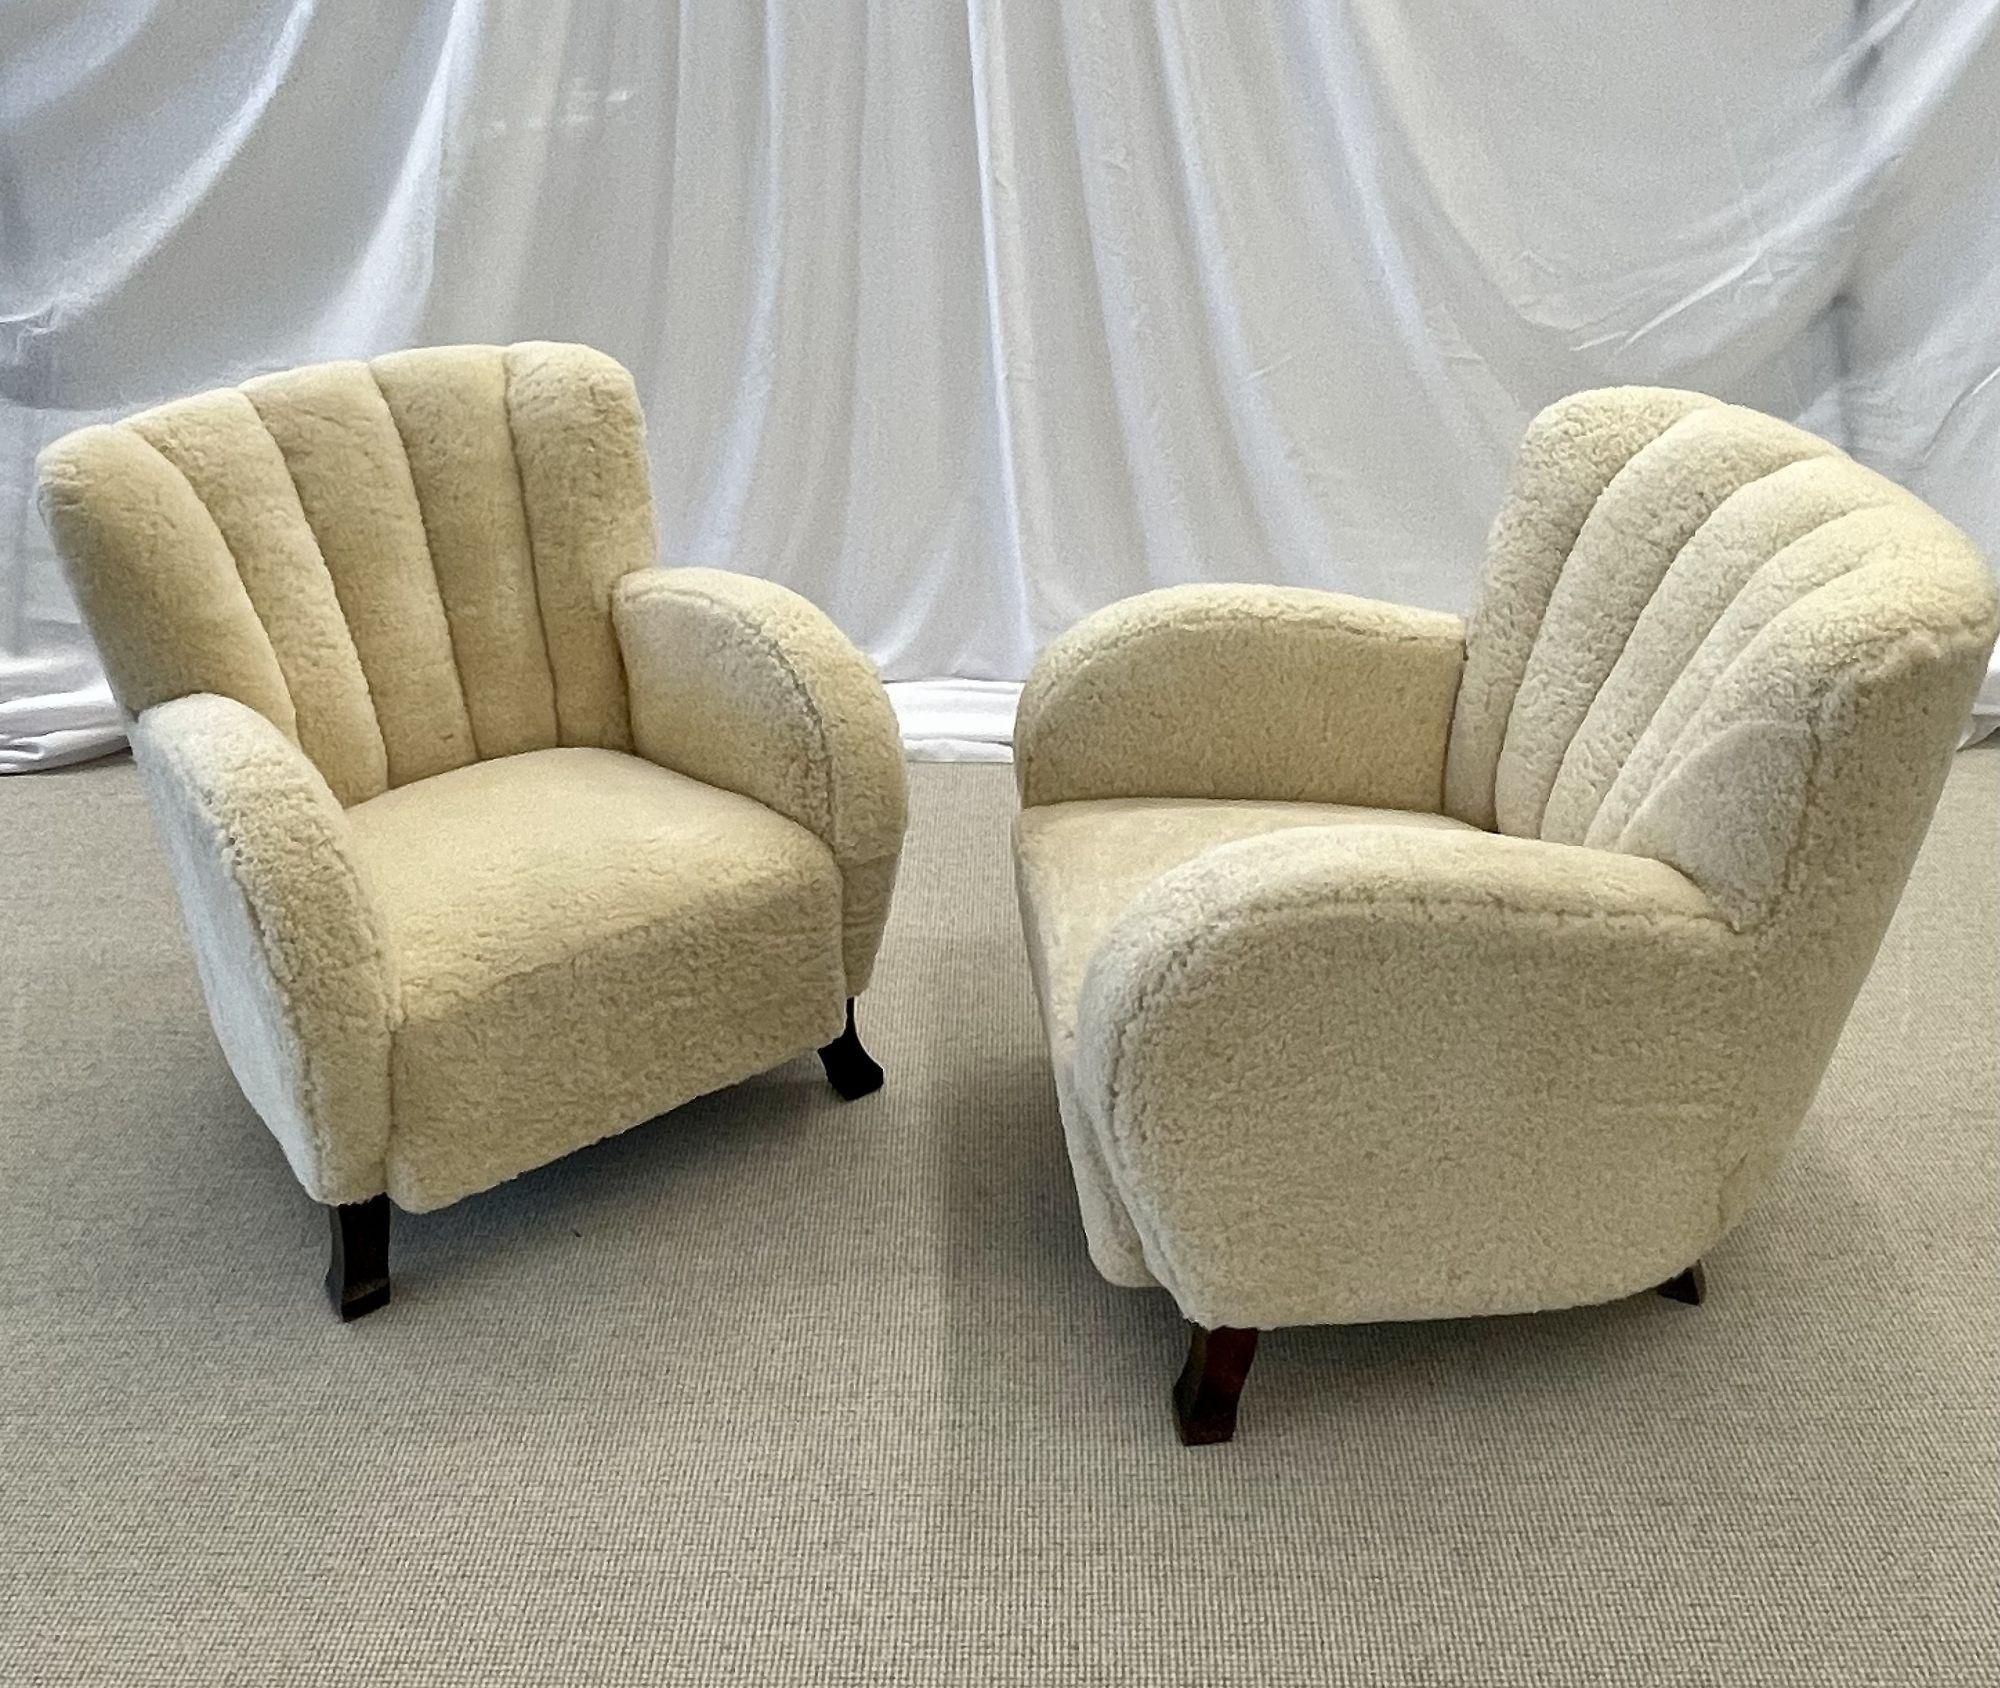 Swedish Mid-Century Modern, Art Deco Lounge Chairs, Beige Shearling, Wood, 1930s

Chic pair of Art Deco organic form lounge chairs designed and produced in Sweden circa 1930s. This stunning pair of Fritz Hansen style easy chairs feature a channeled